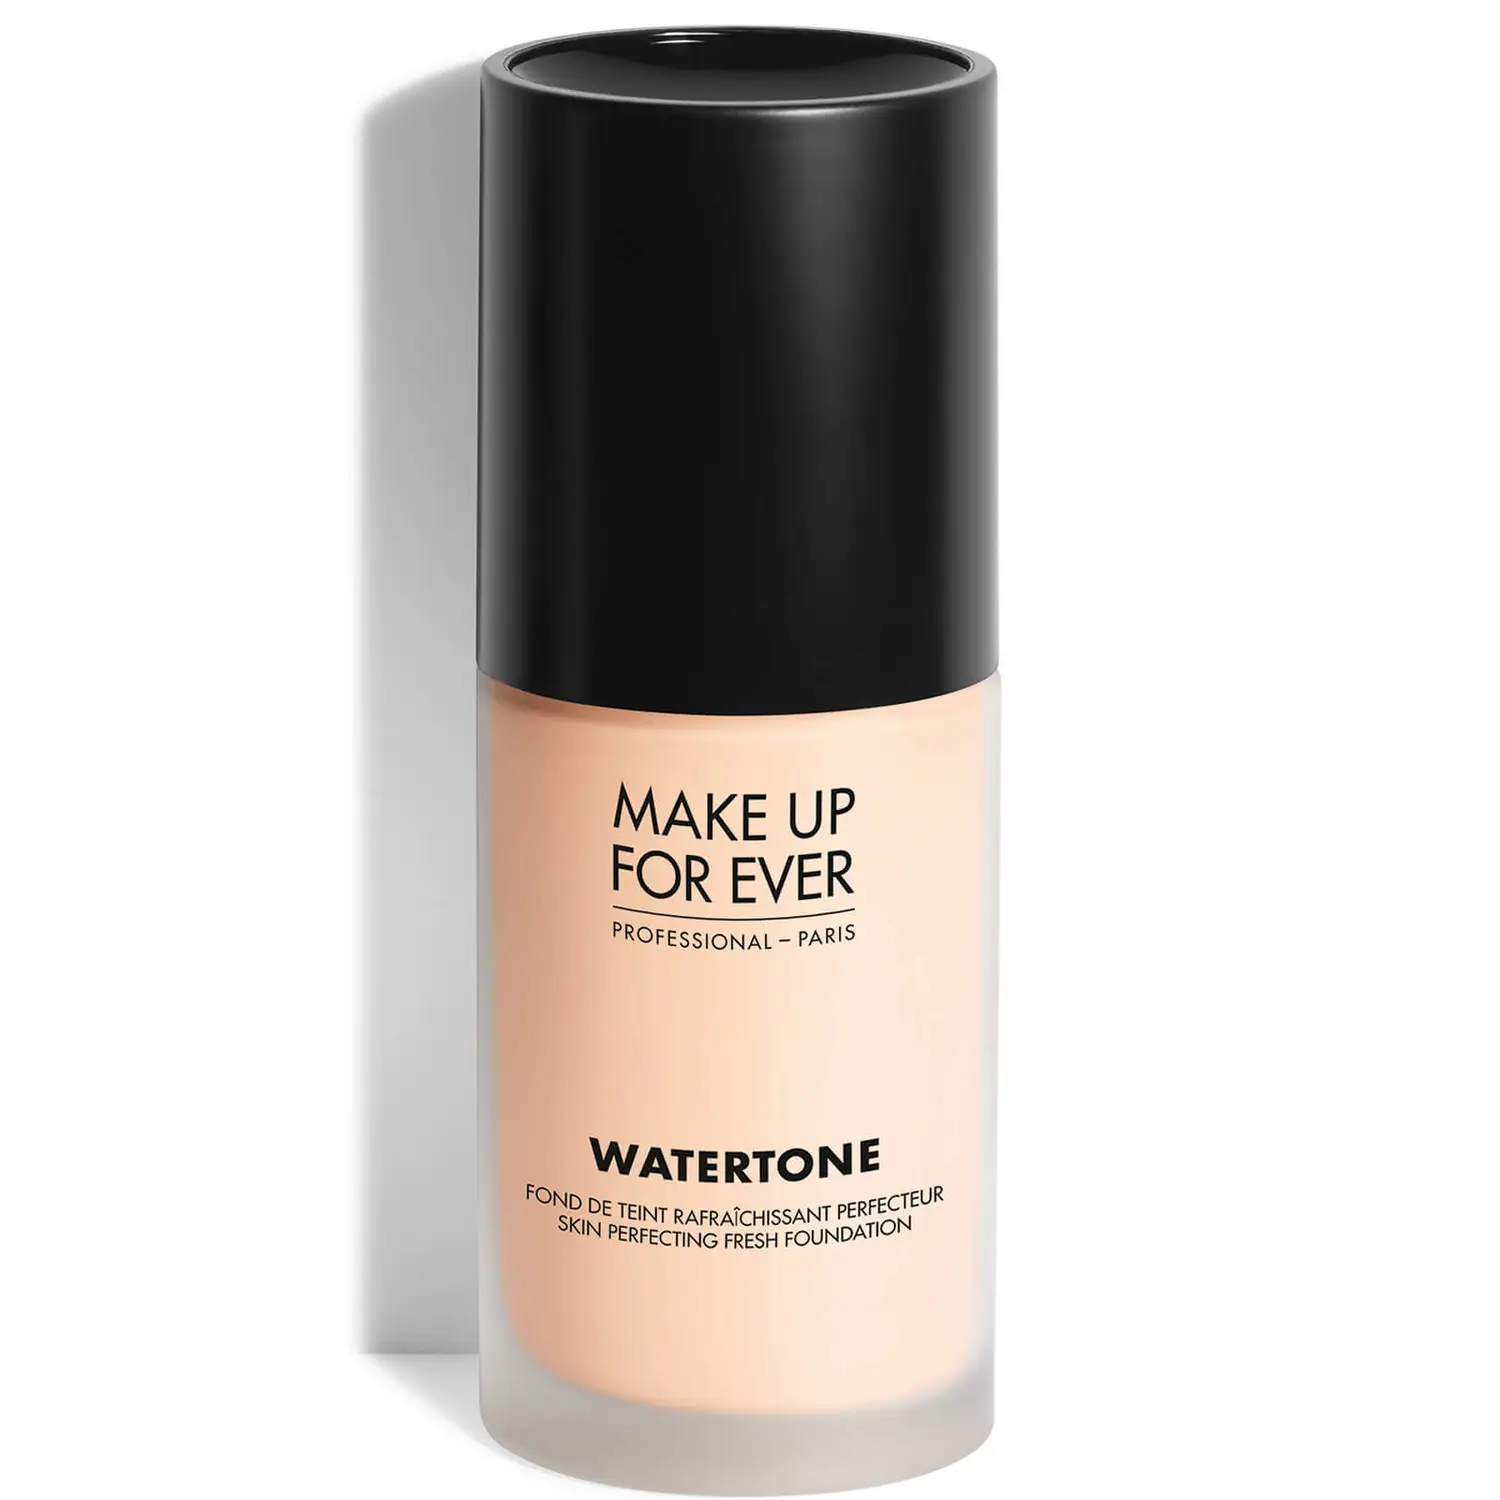 MAKE UP FOR EVER watertone Foundation No Transfer and Natural Radiant Finish 40ml (Various Shades)